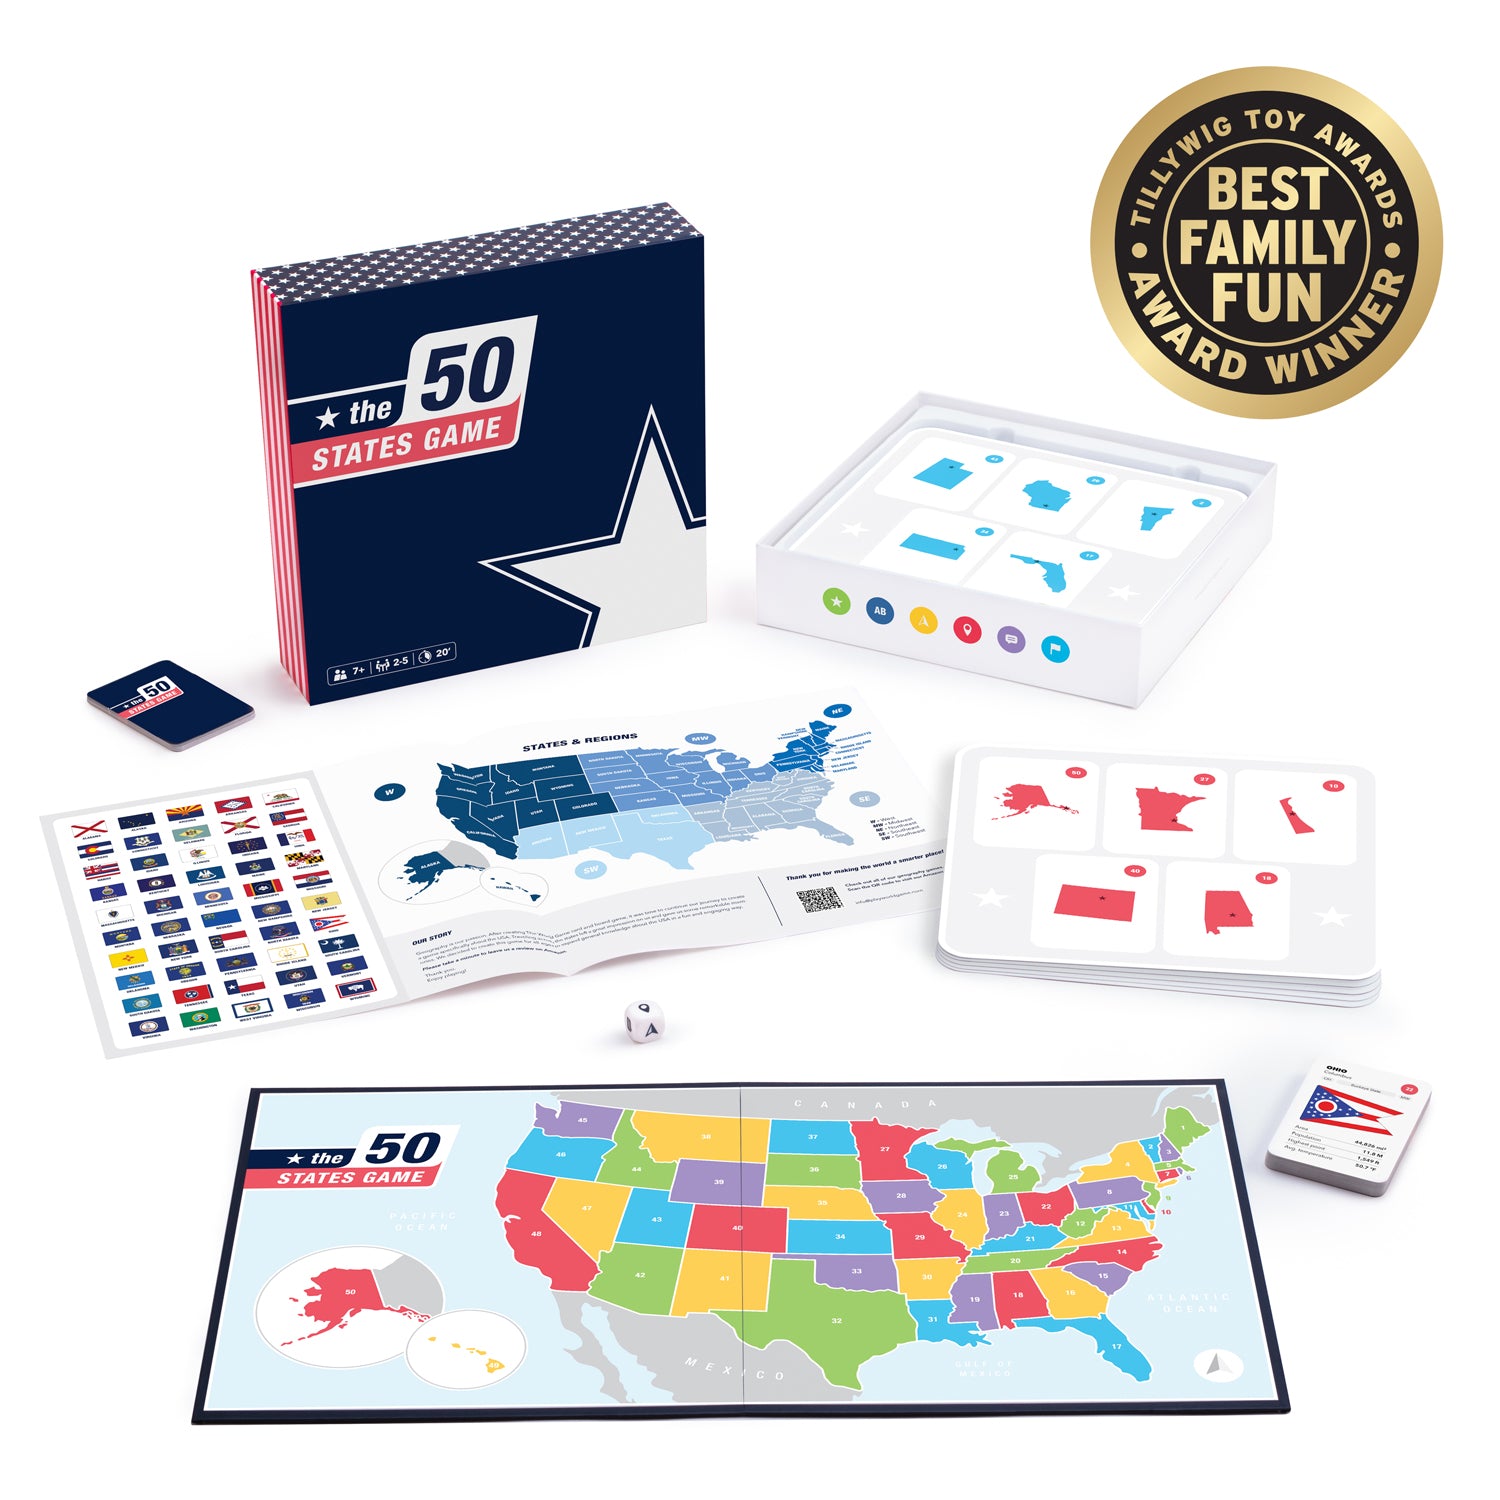 Great trivia game and a fun way to learn about usa states, flags and geography.